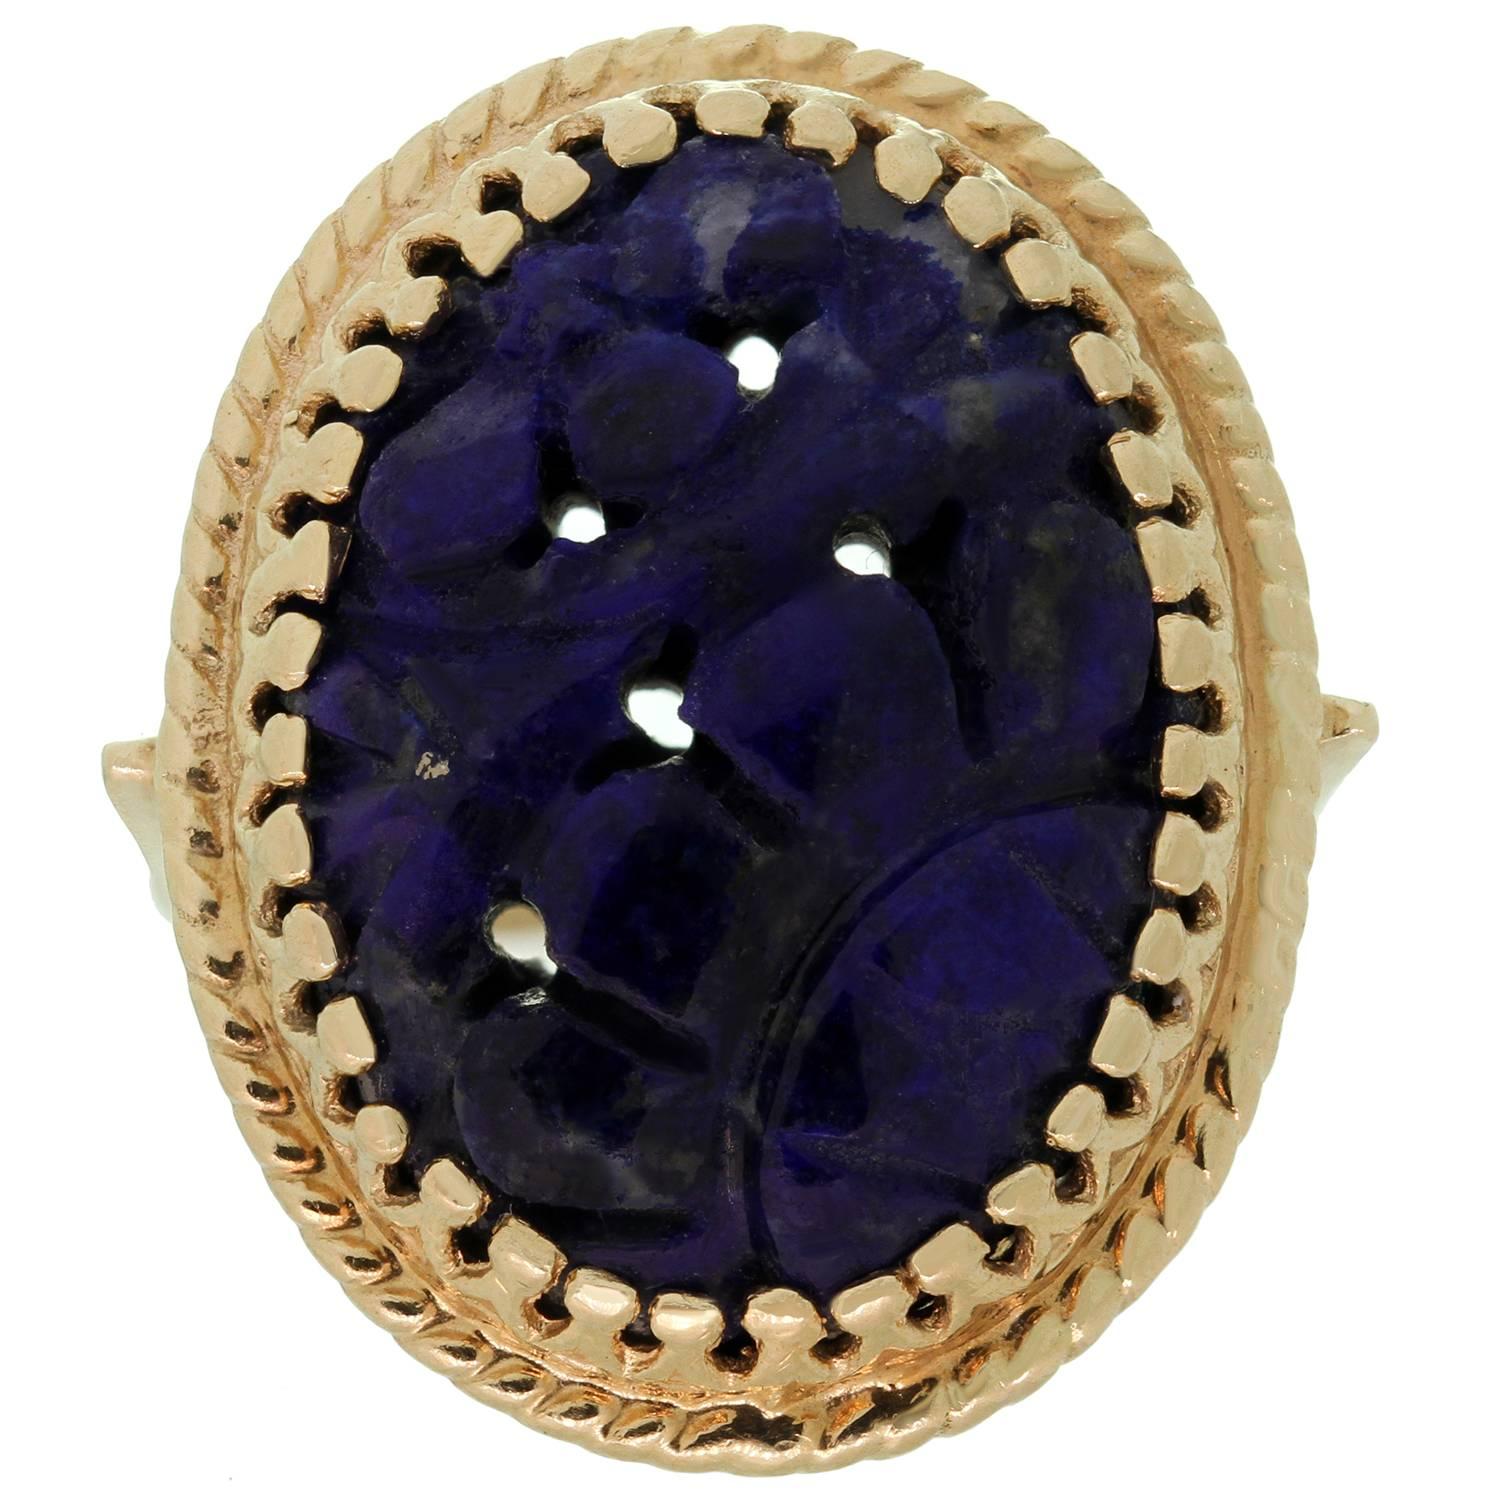 This fabulous vintage cocktail ring is crafted in 14k yellow gold and set with a beautifully hand-carved oval natural lapis lazuli stone. Made in United States circa 1970s. Measurements: 0.74